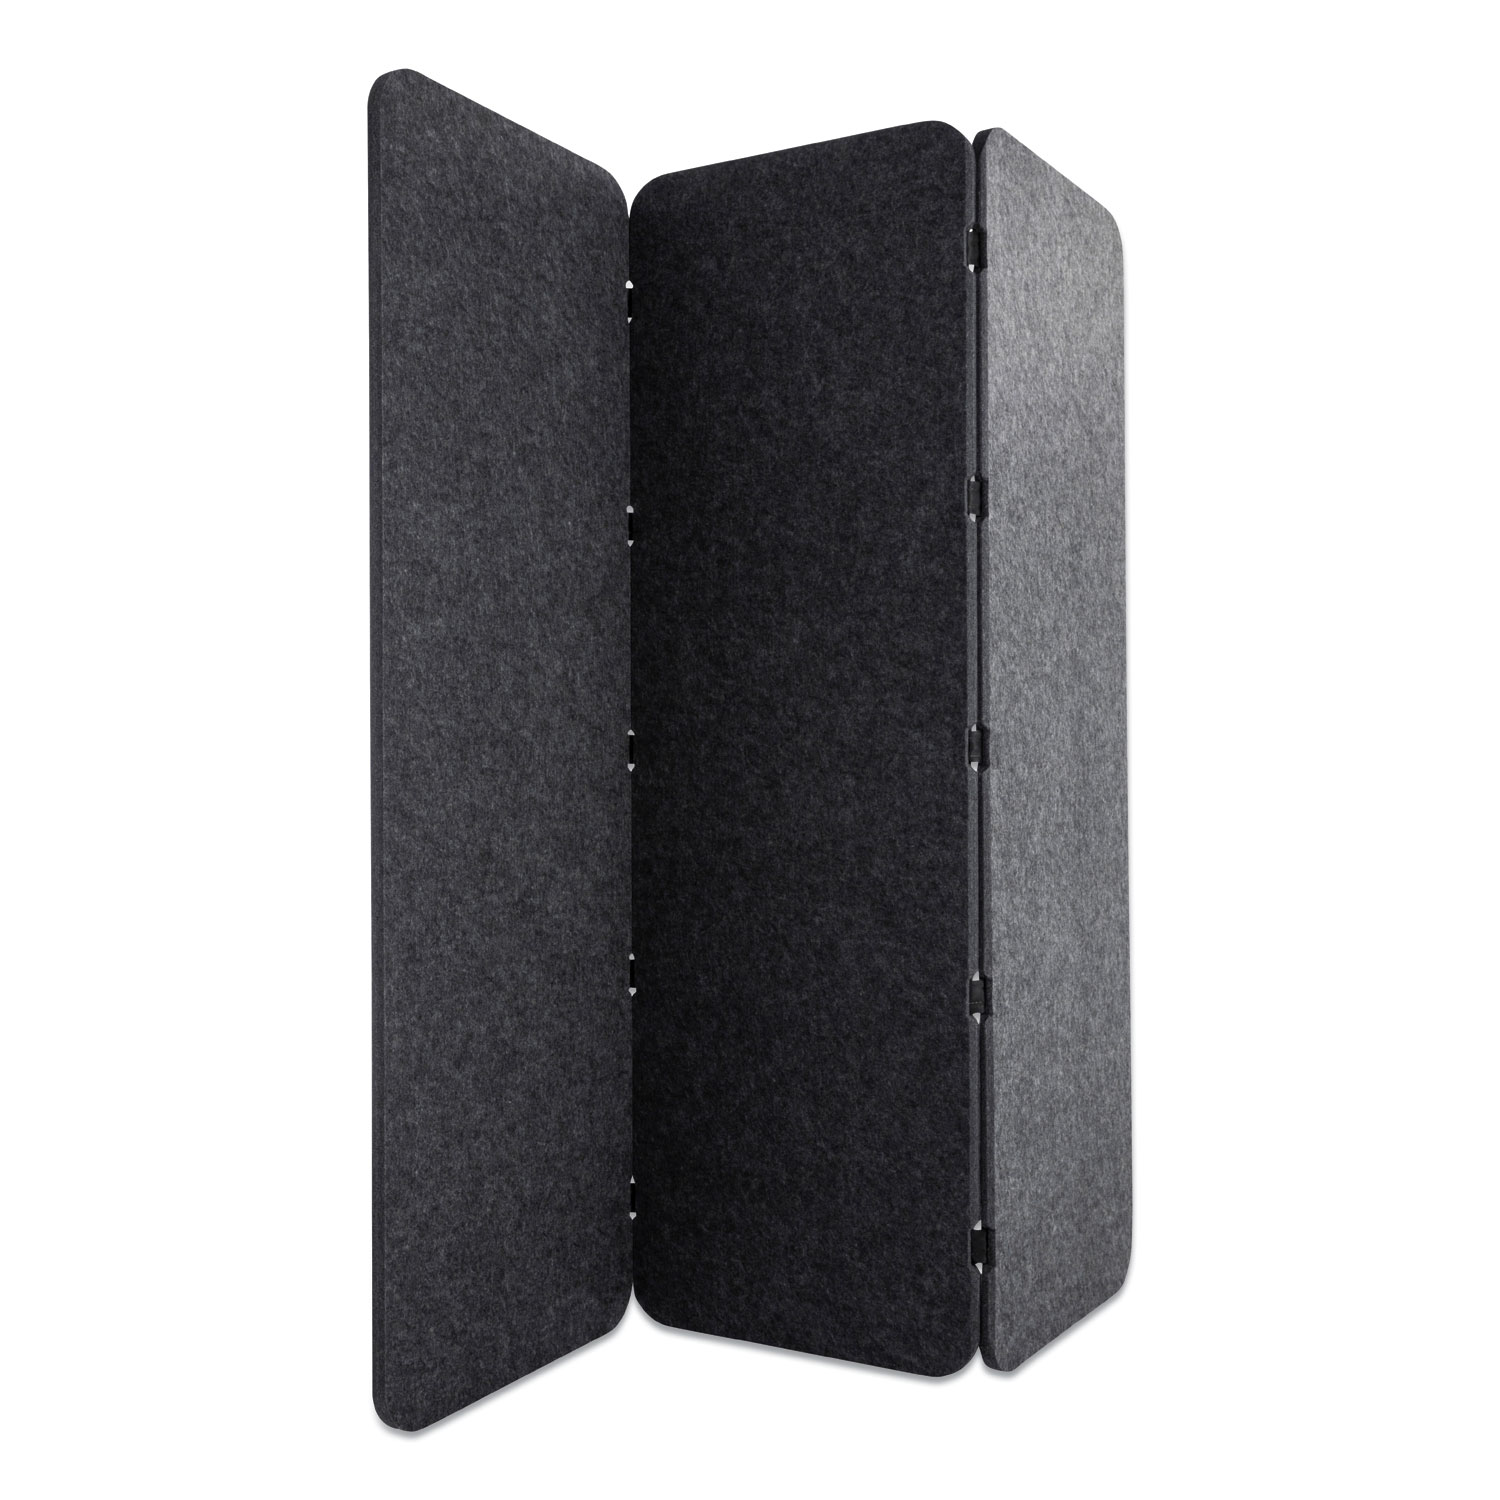  Lumeah LUCO72701A Concertina Foldable Sound Reducing Room Divider Privacy Screen, 70 x 1 x 70, Polyester, Ash (GN1LUCO72701A) 